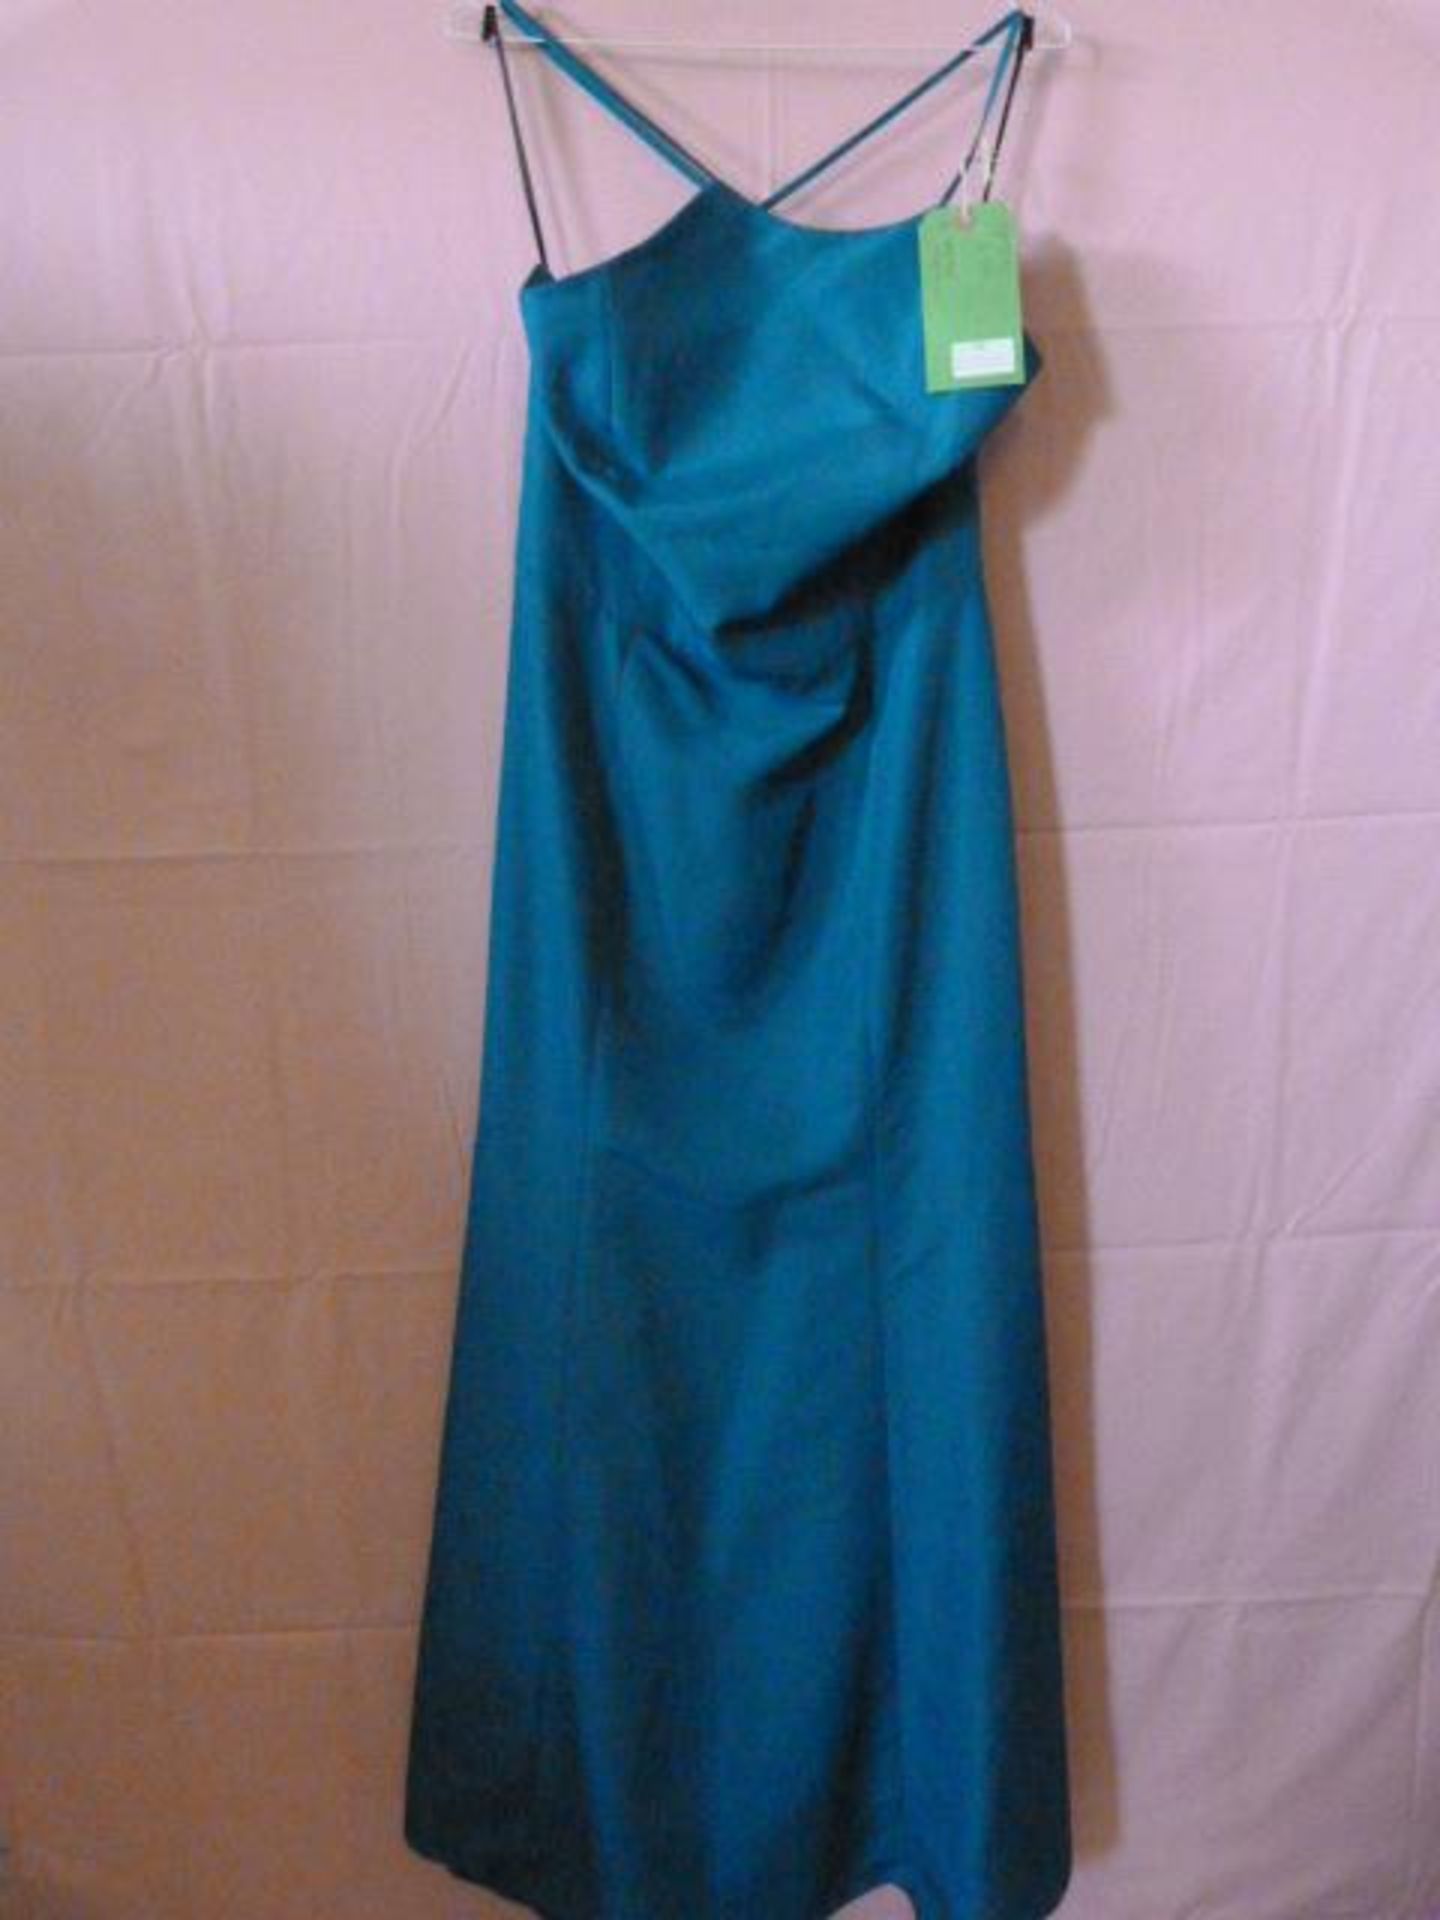 *Dessy Collection Size: 14 Vintage Teal Bridesmaid